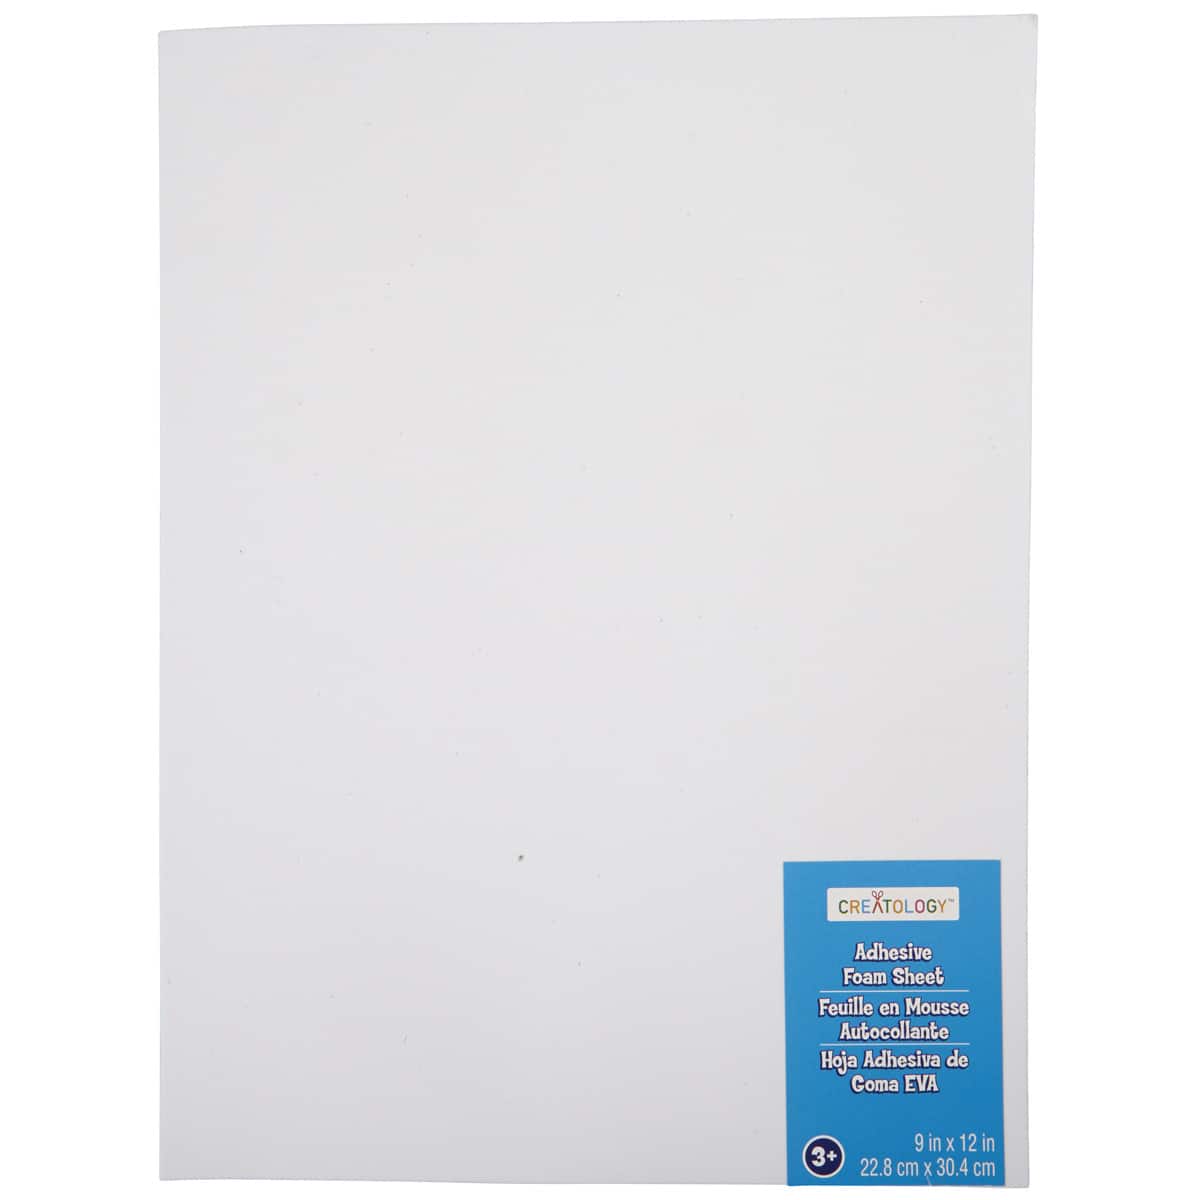 12 Sheets Sticky Foam Sheets Double Sided Adhesive Foam Sheets 3D White  Dual-Adhesive Foam Sheets for Shaker Cards Scrapbooking Crafting (7.9 x 5.9  Inch)